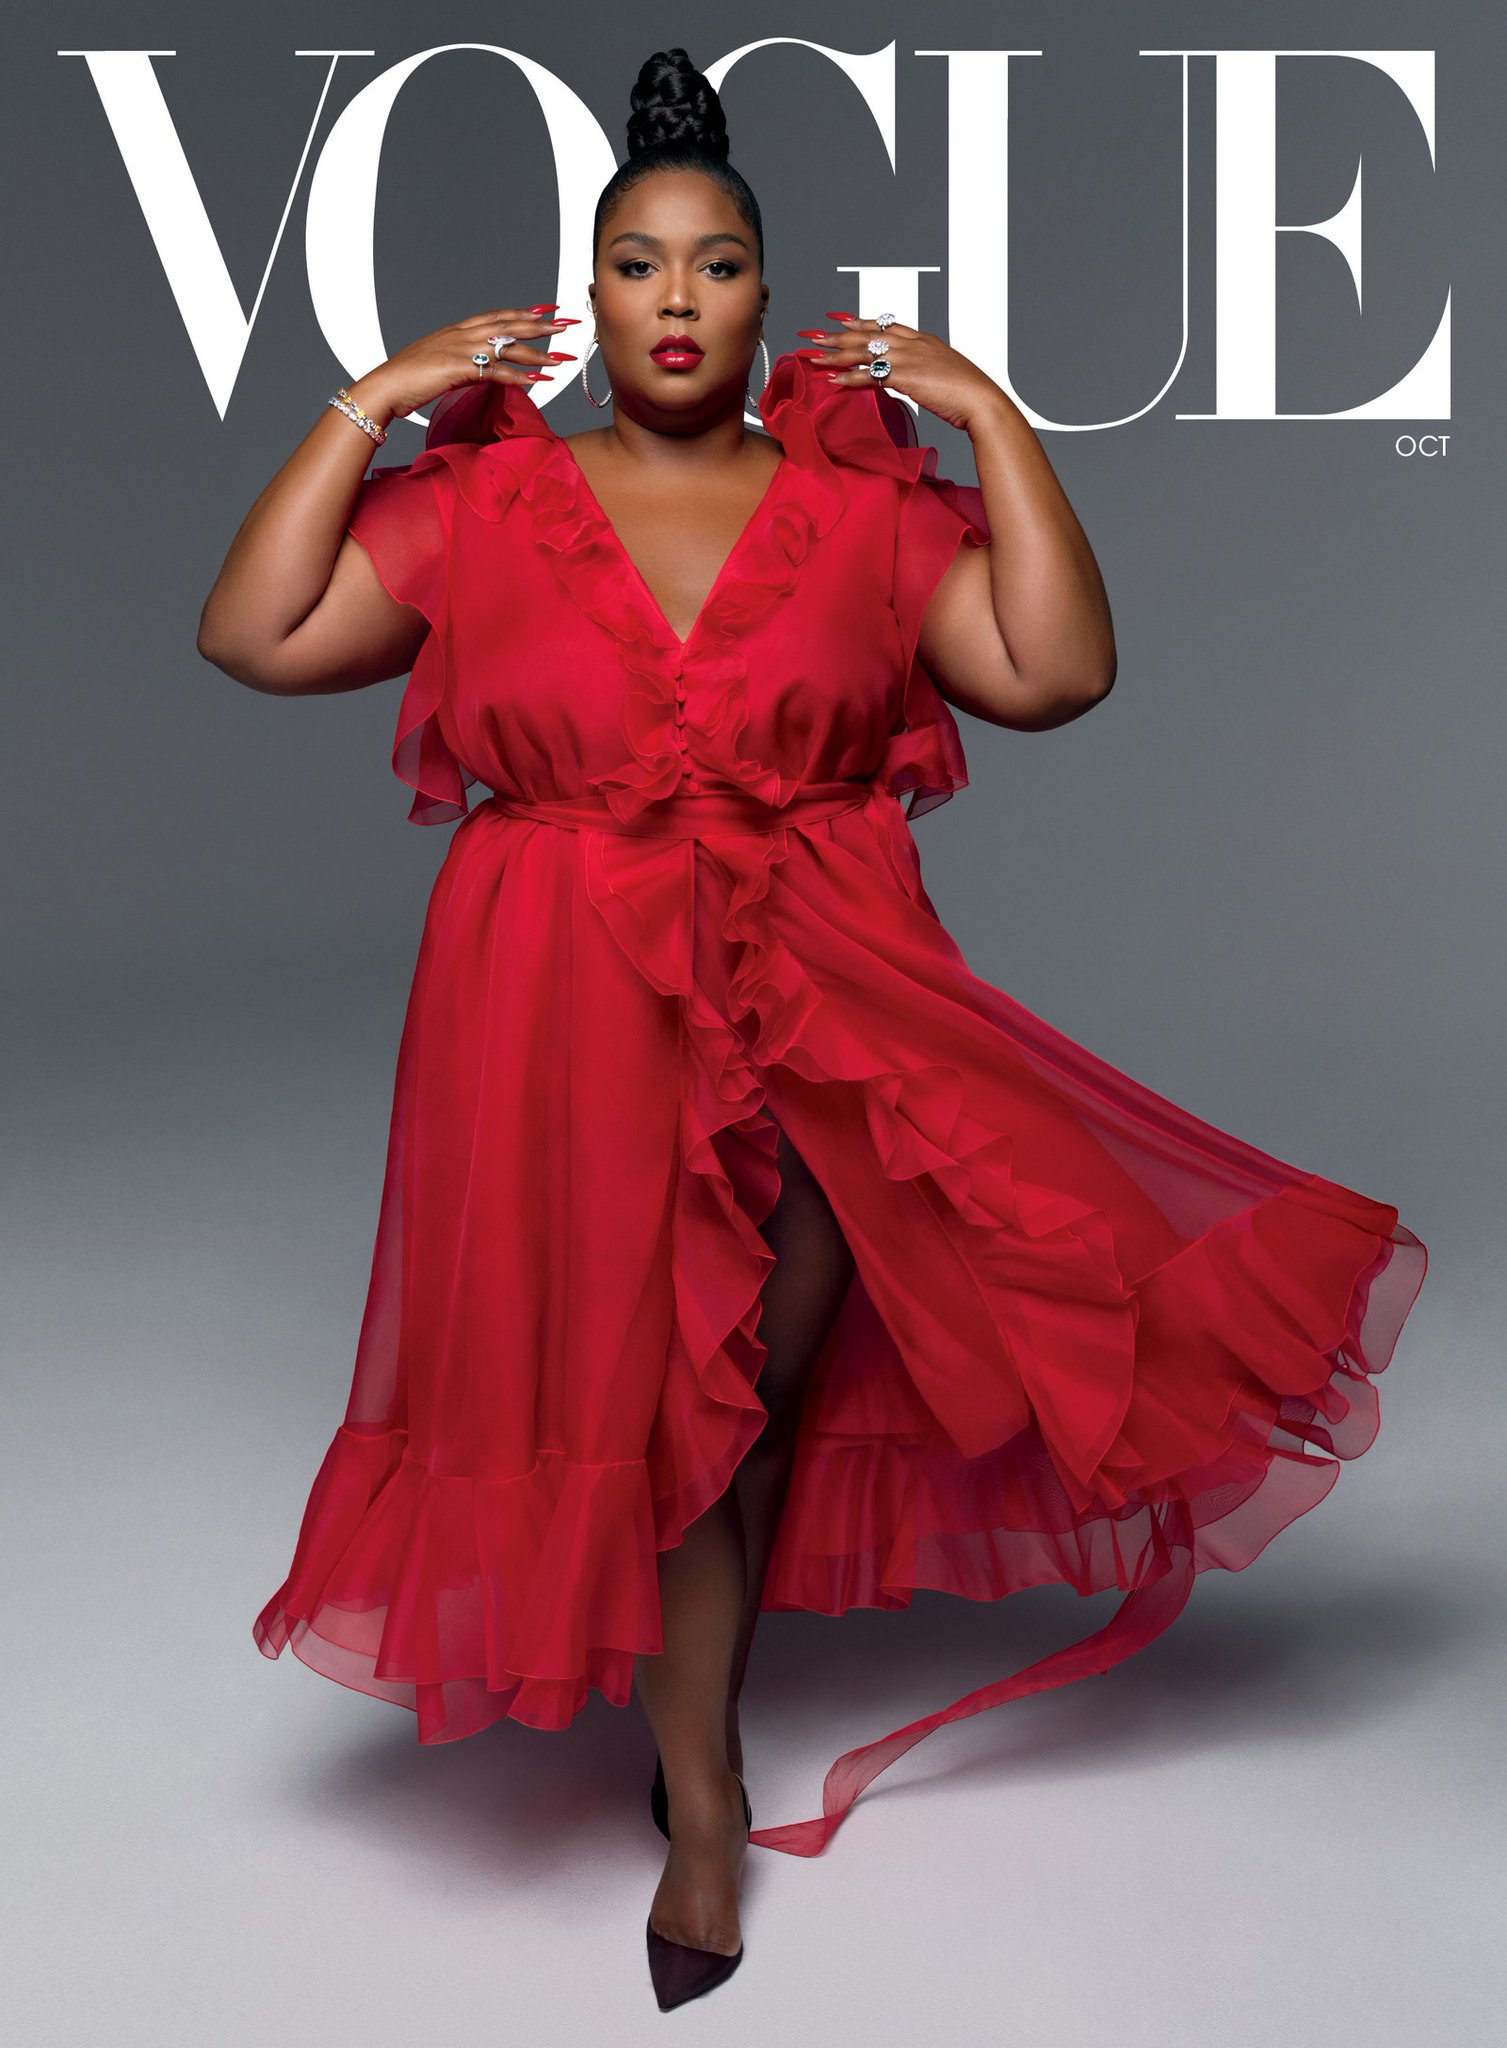 lizzo-in-valentino-covers-vogue-october-2020-issue-photographed-by-hype-williams